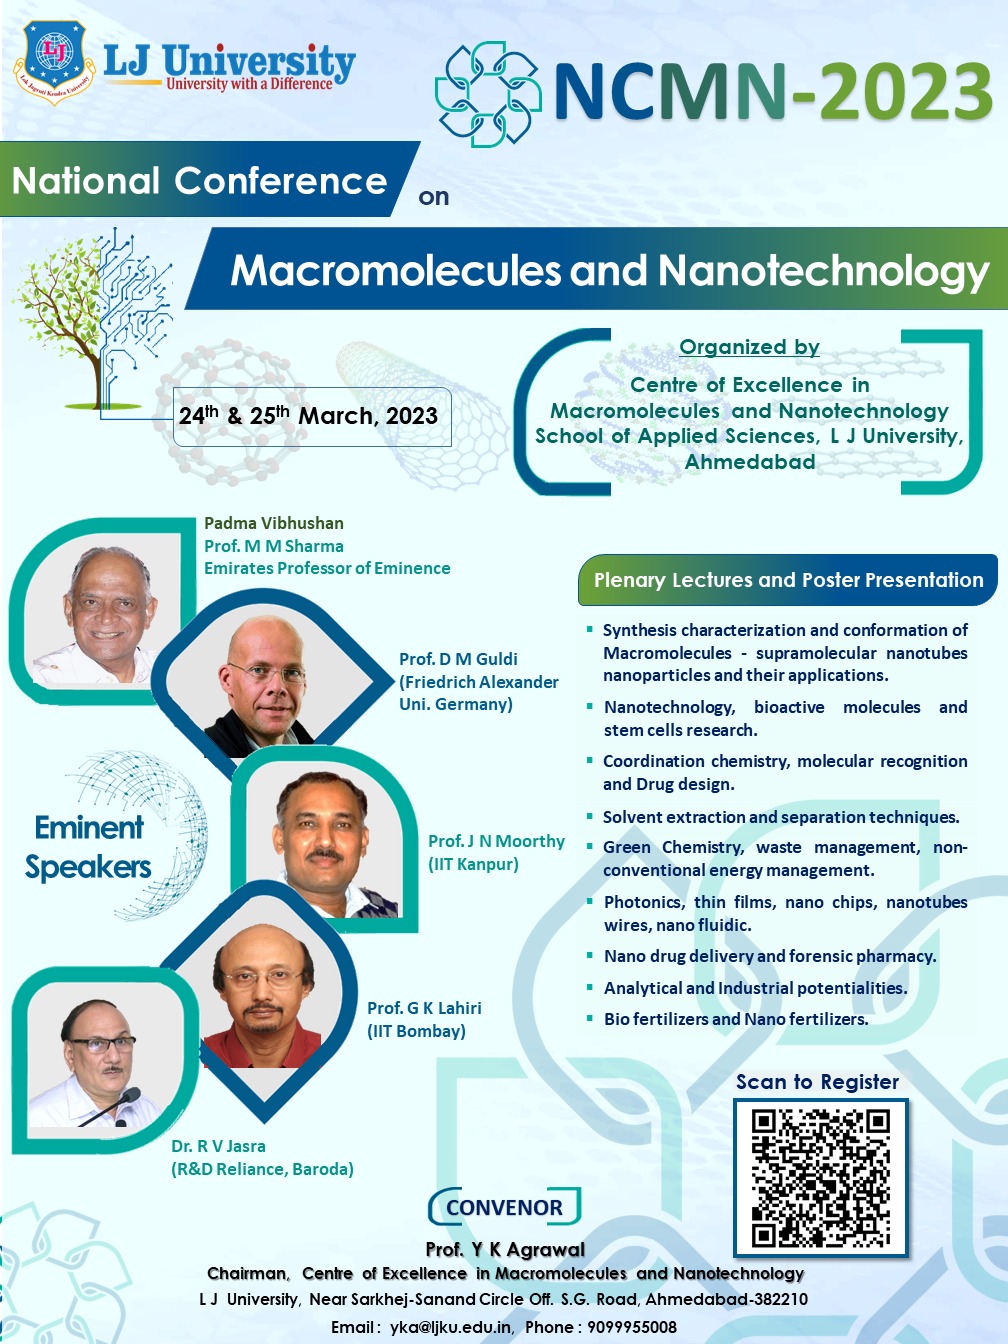 National Conference on Macromolecules and Nanotechnology 